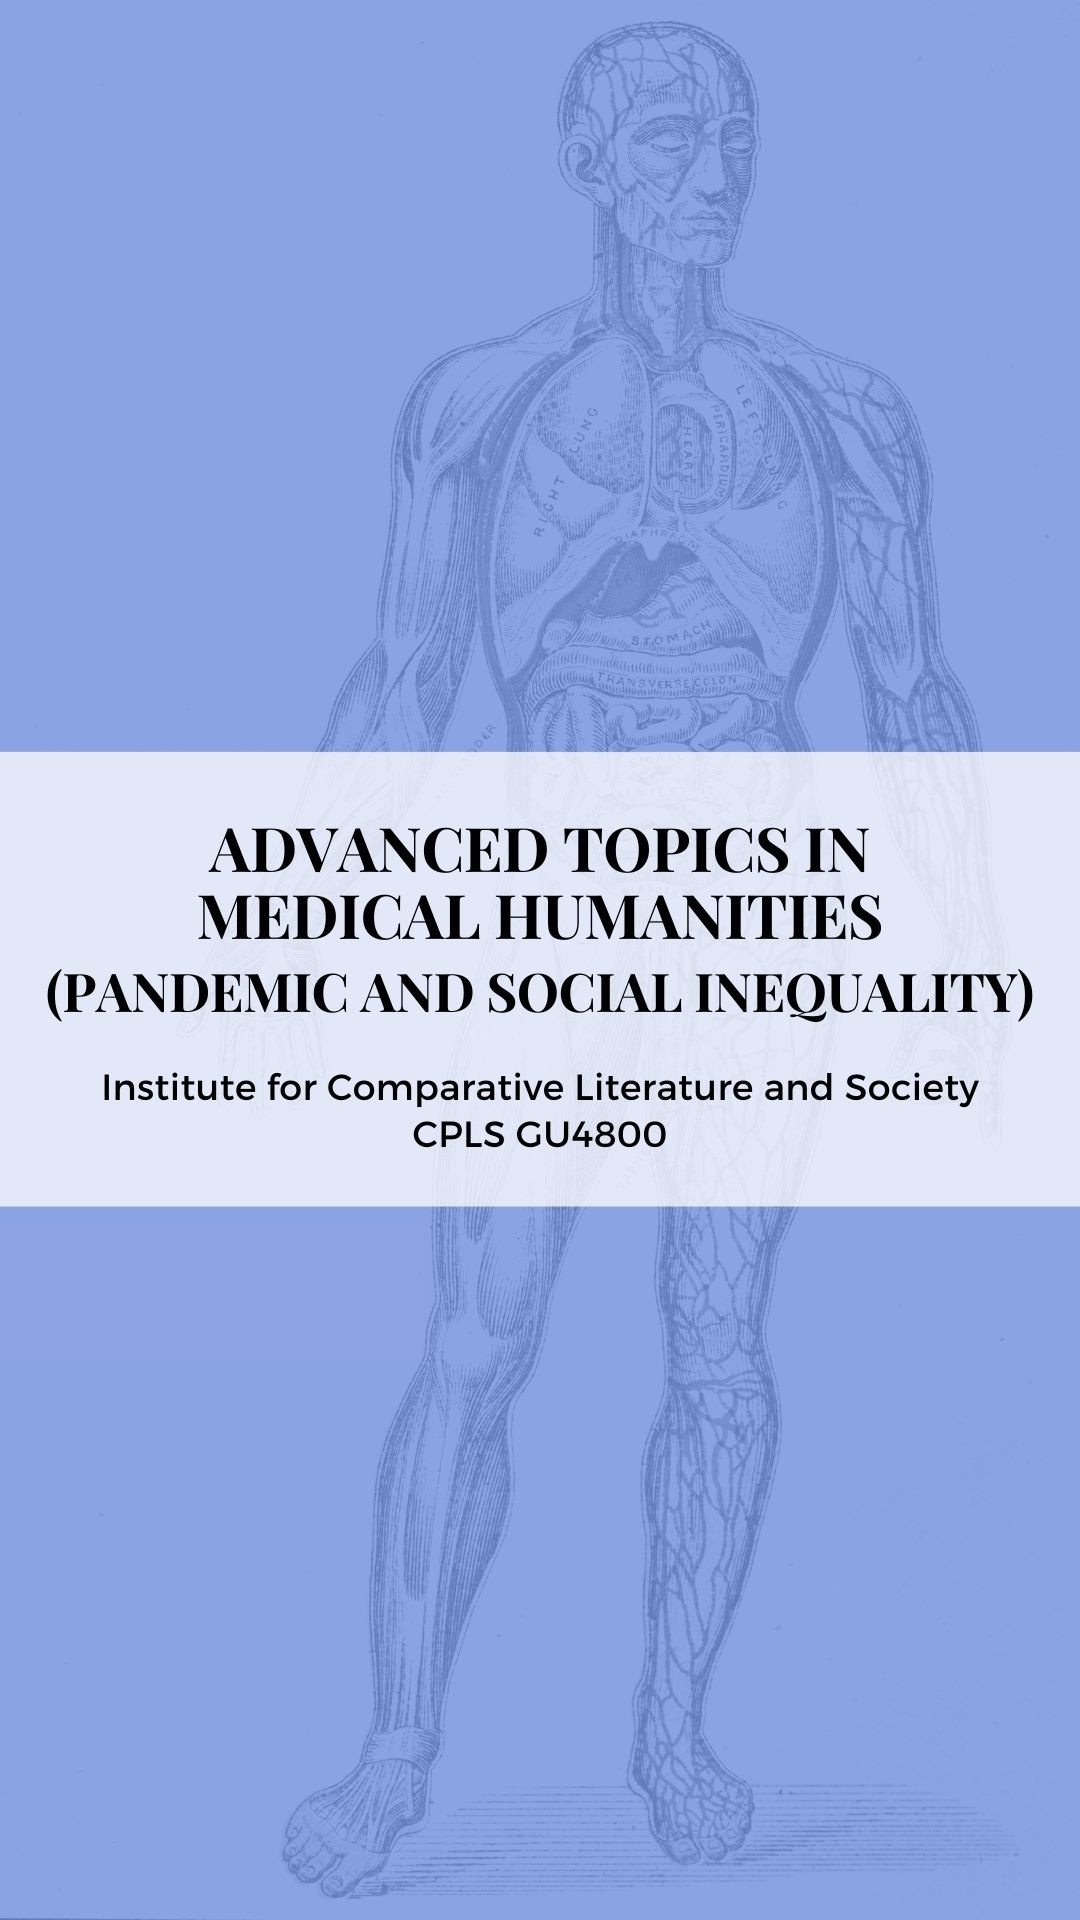 Spring 2021 course Advanced Topics in Medical Humanities (Pandemic and Social Inequality); course number CPLS GU4800